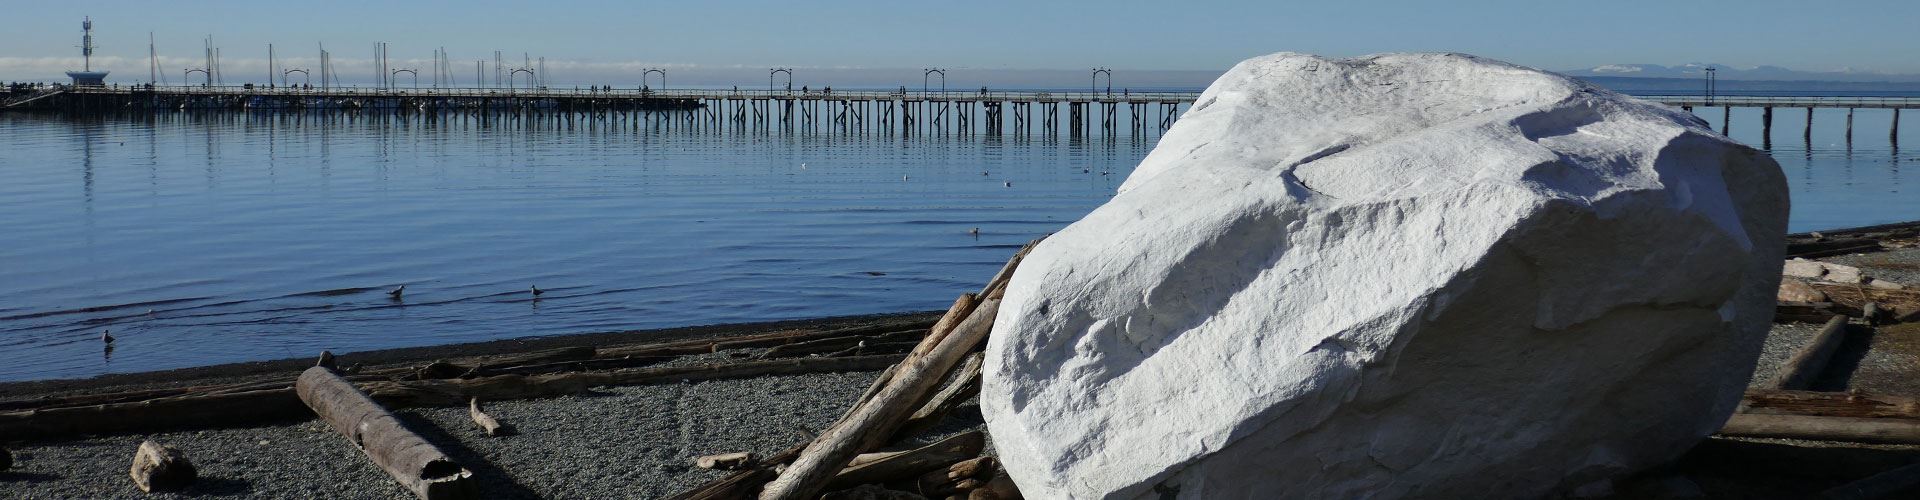 White rock on beachfront with wooden pier in background